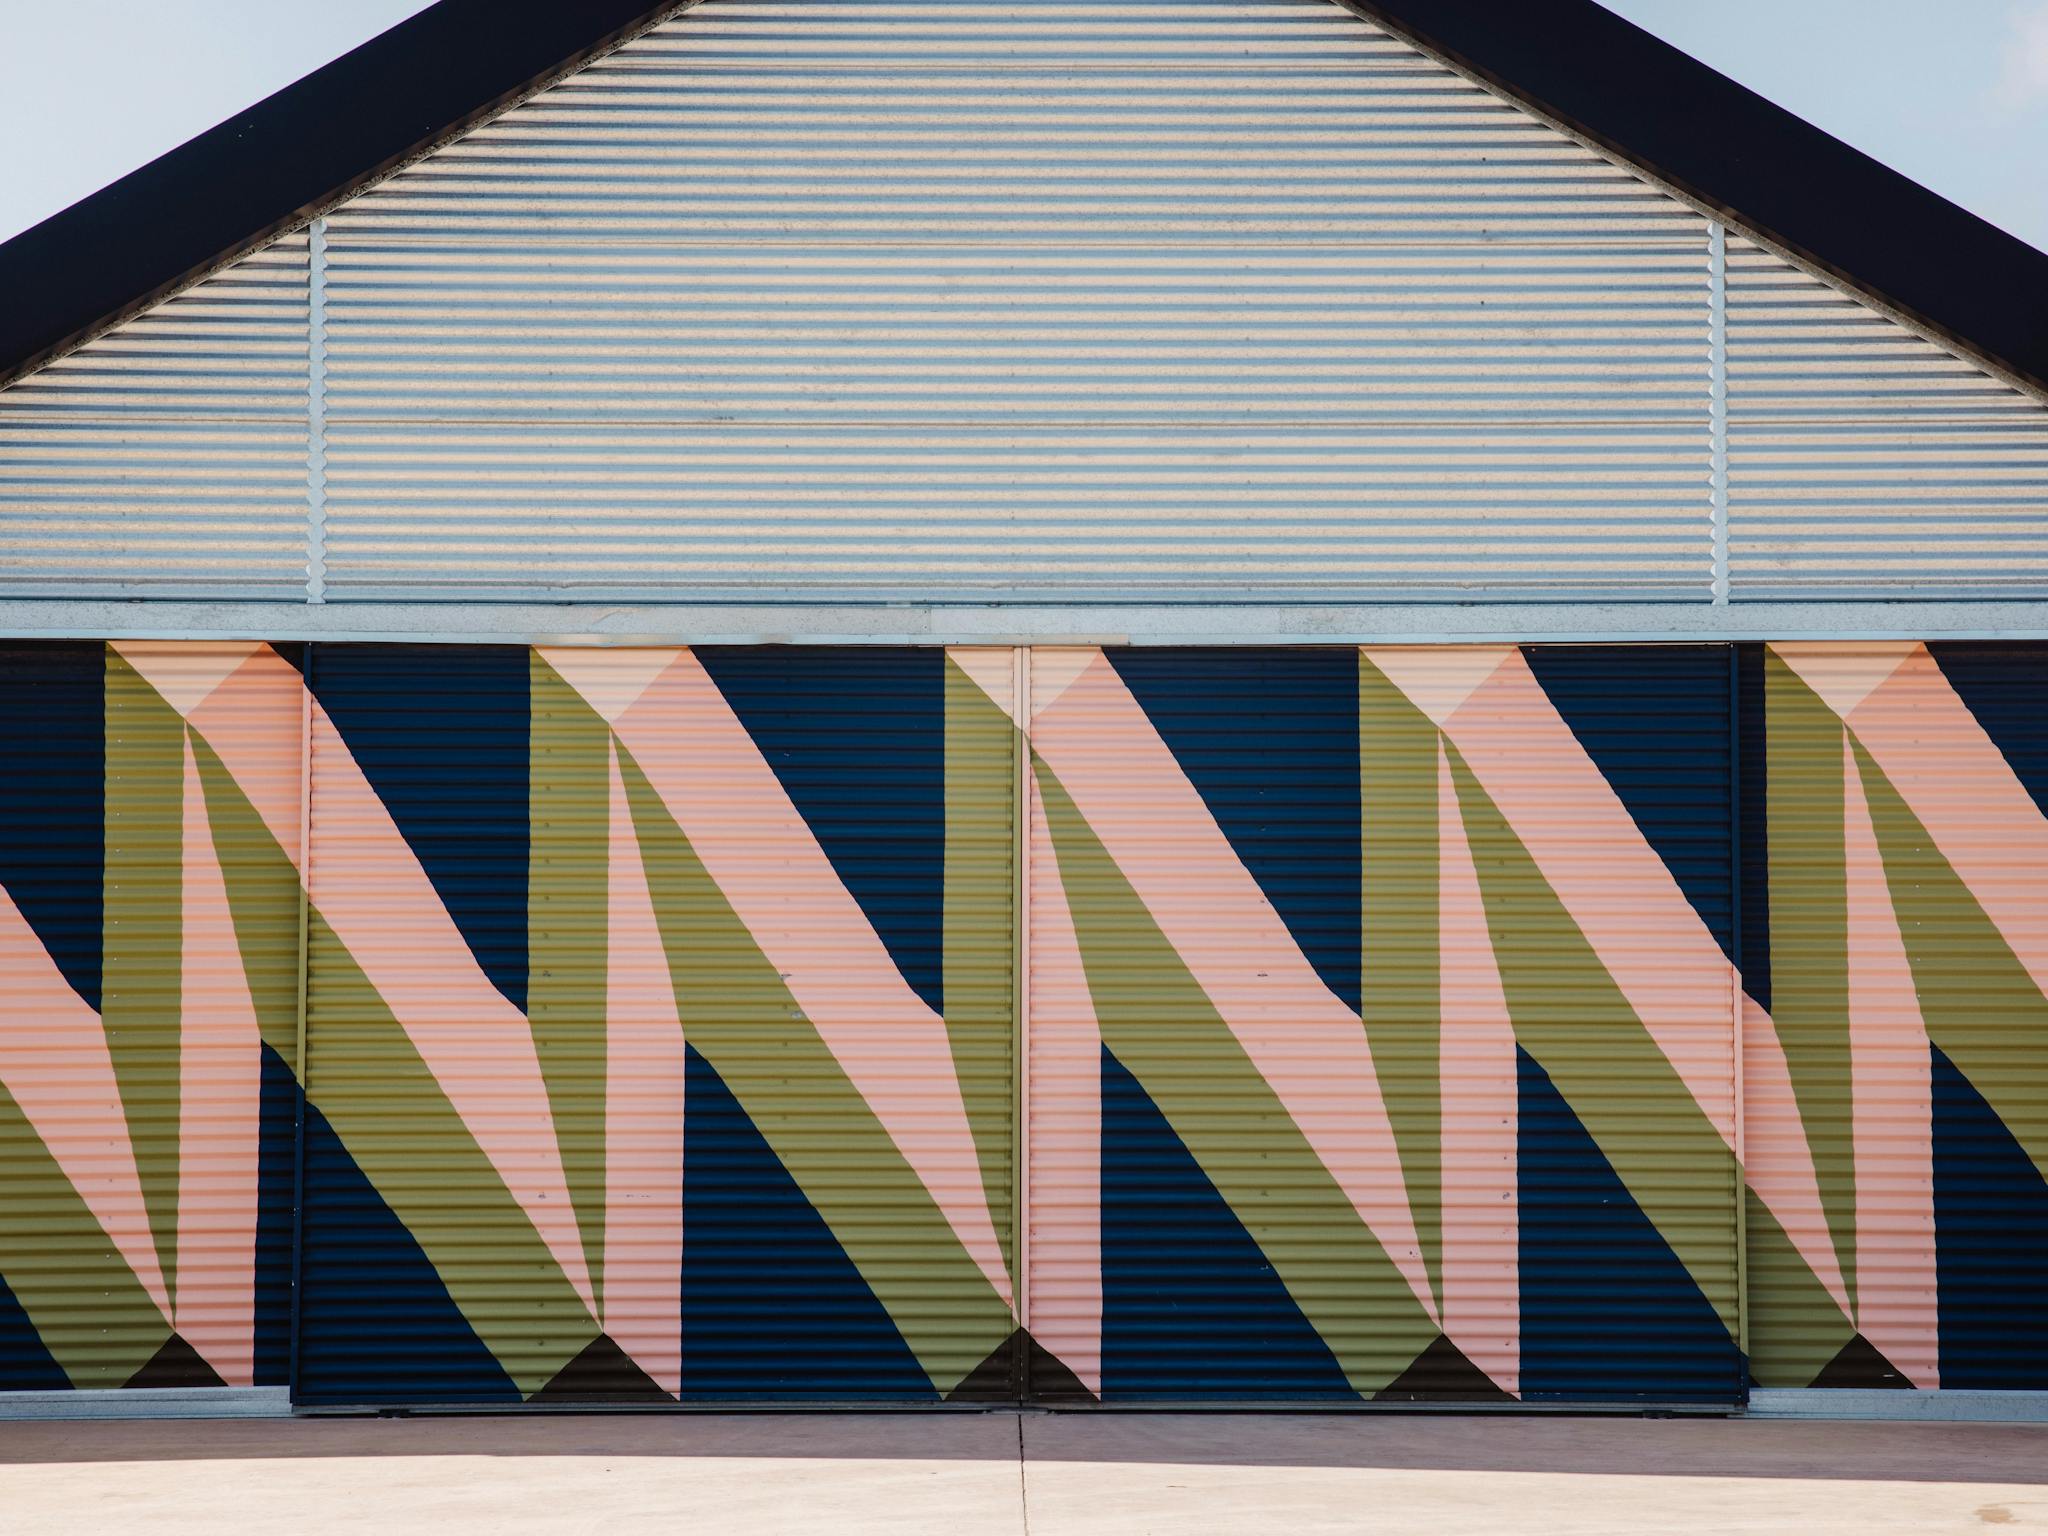 The iconic distillery doors at Never Never Distilling Co. in McLaren Vale, South Australia